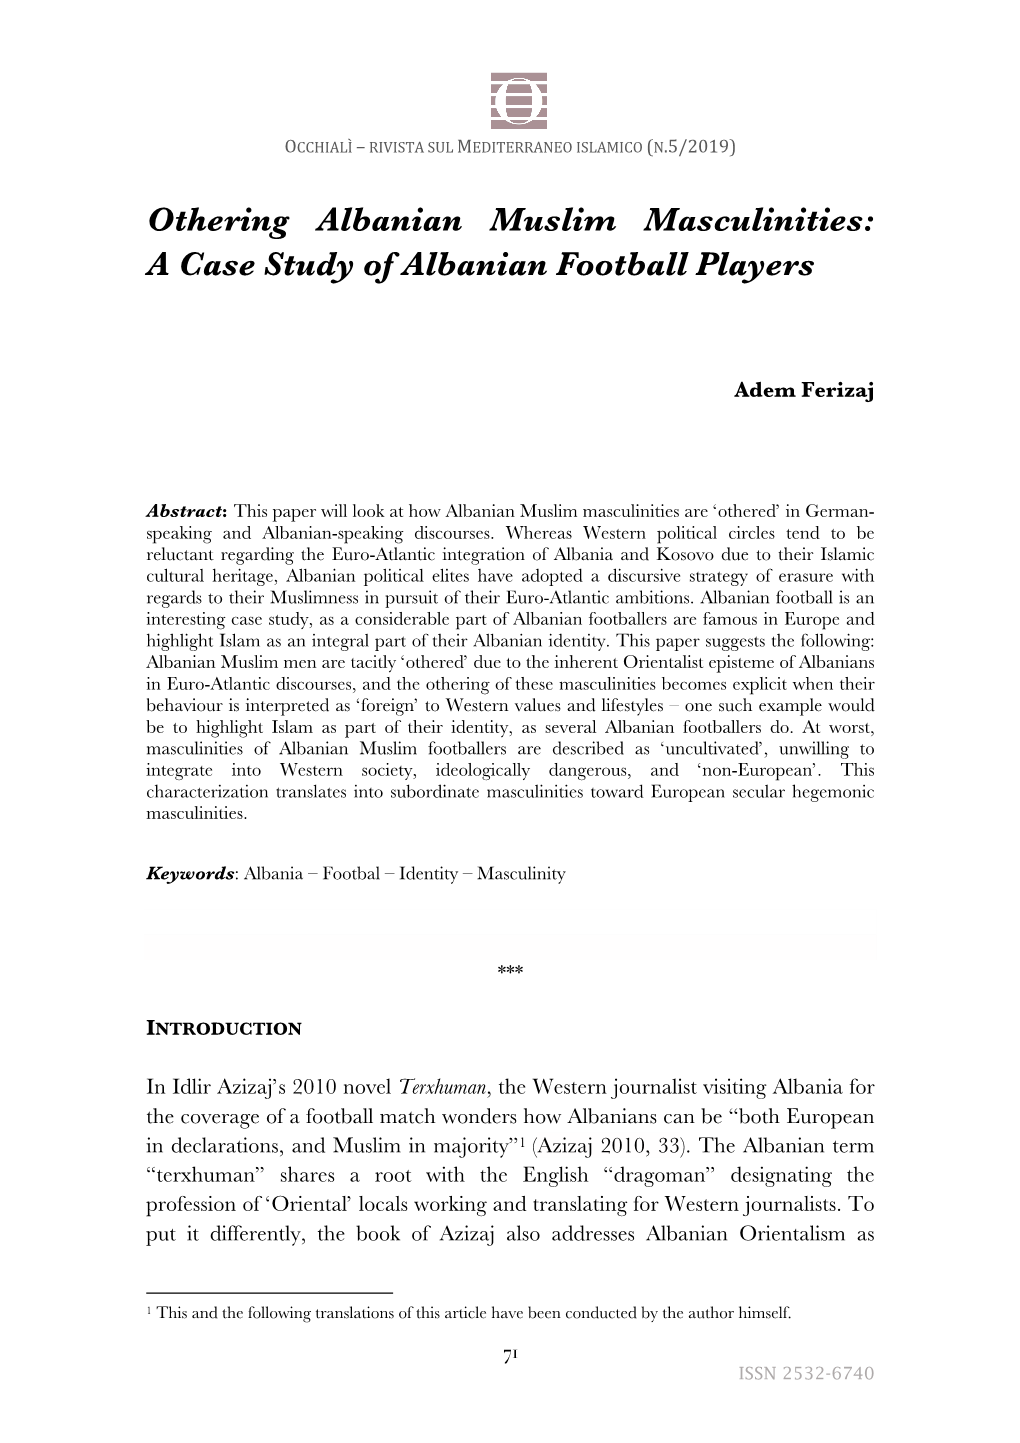 Othering Albanian Muslim Masculinities: a Case Study of Albanian Football Players